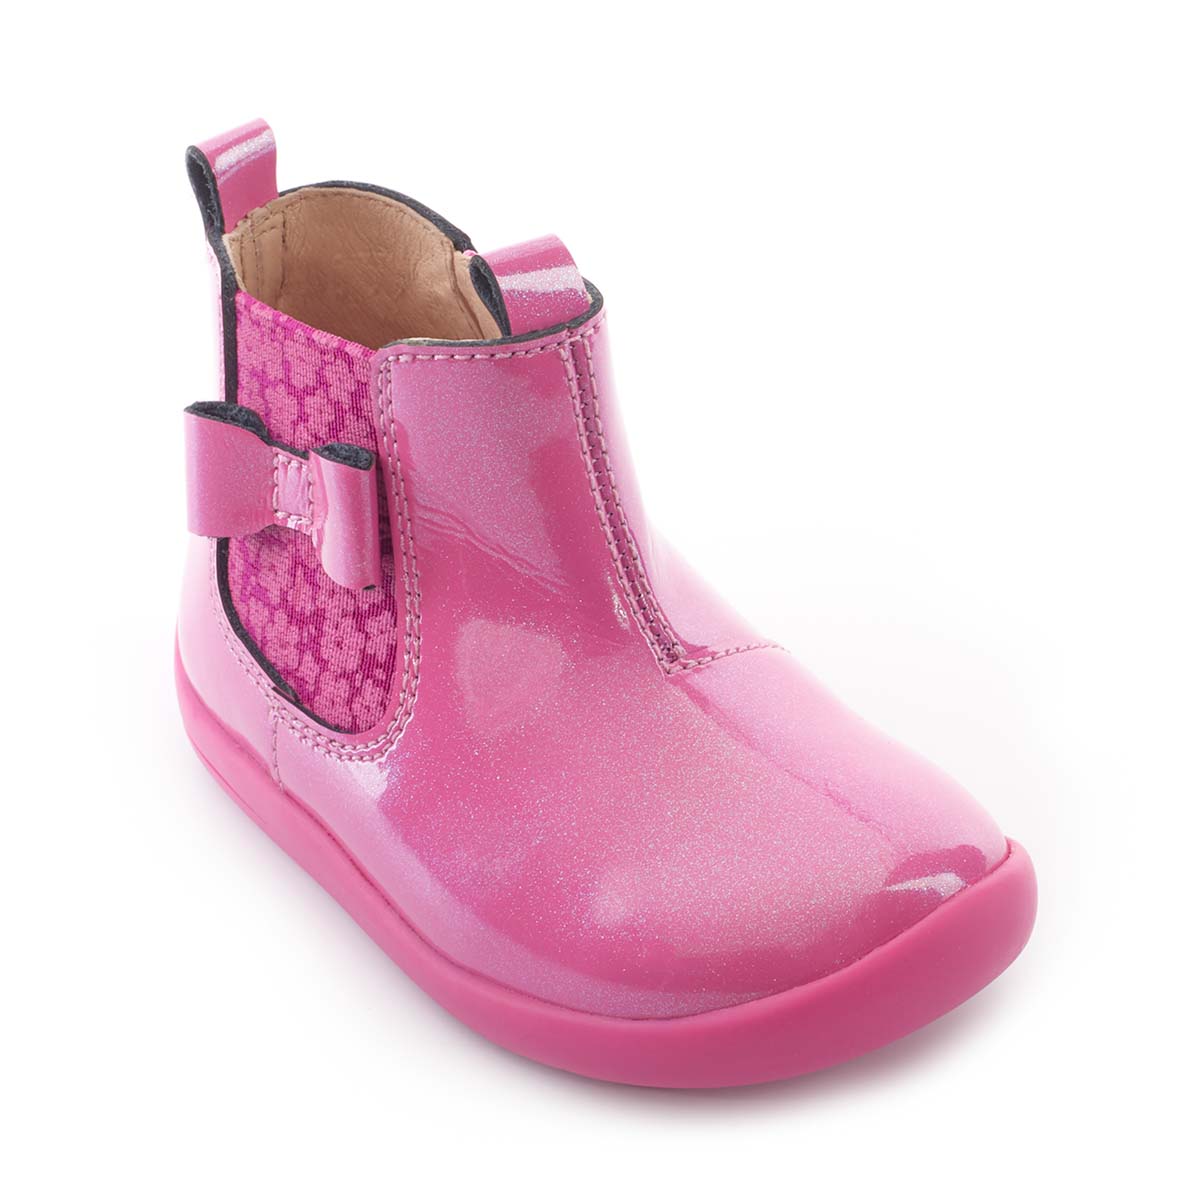 Start Rite - Wonderland Chelsea In Pink 0789-16F In Size 4 In Plain Pink Infant Girls Boots  In Pink For kids